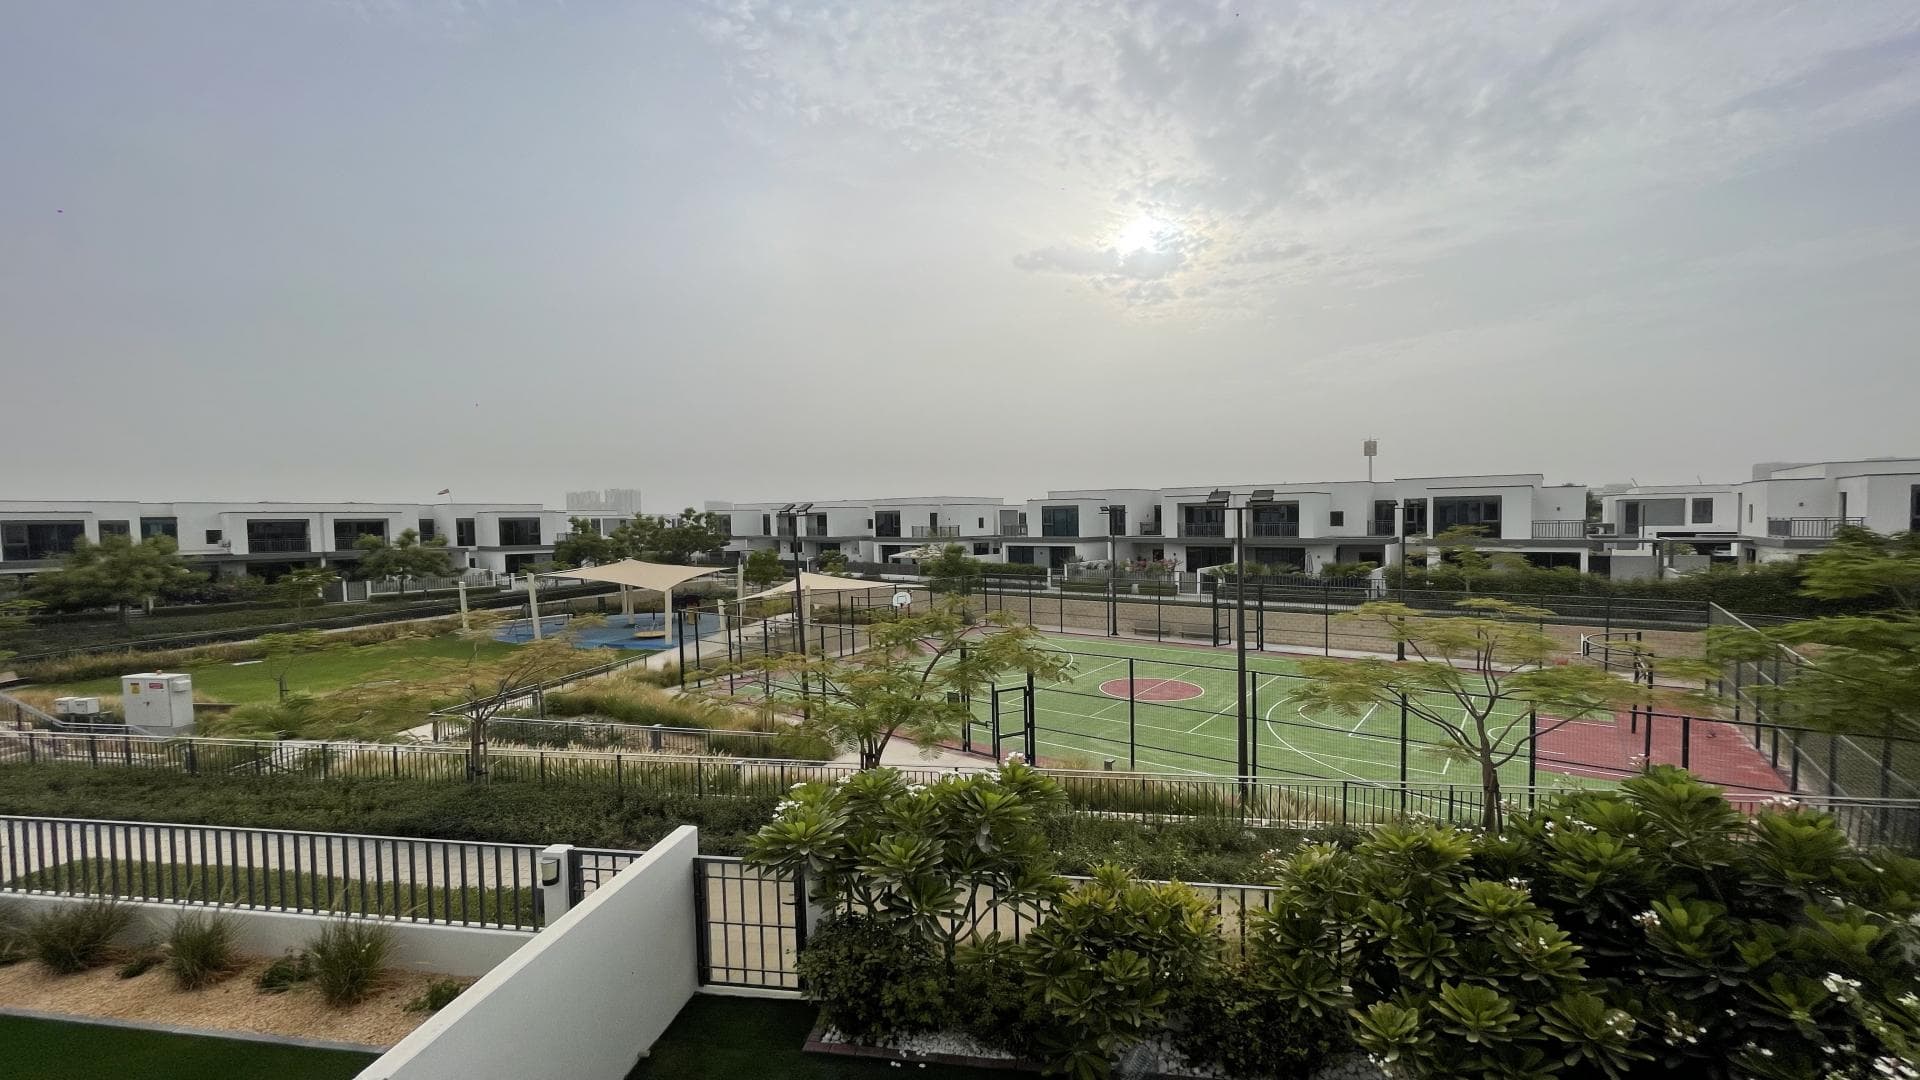 4 Bedroom Townhouse For Rent Marina Residences 6 Lp36103 31b3514bd2ccee00.jpg